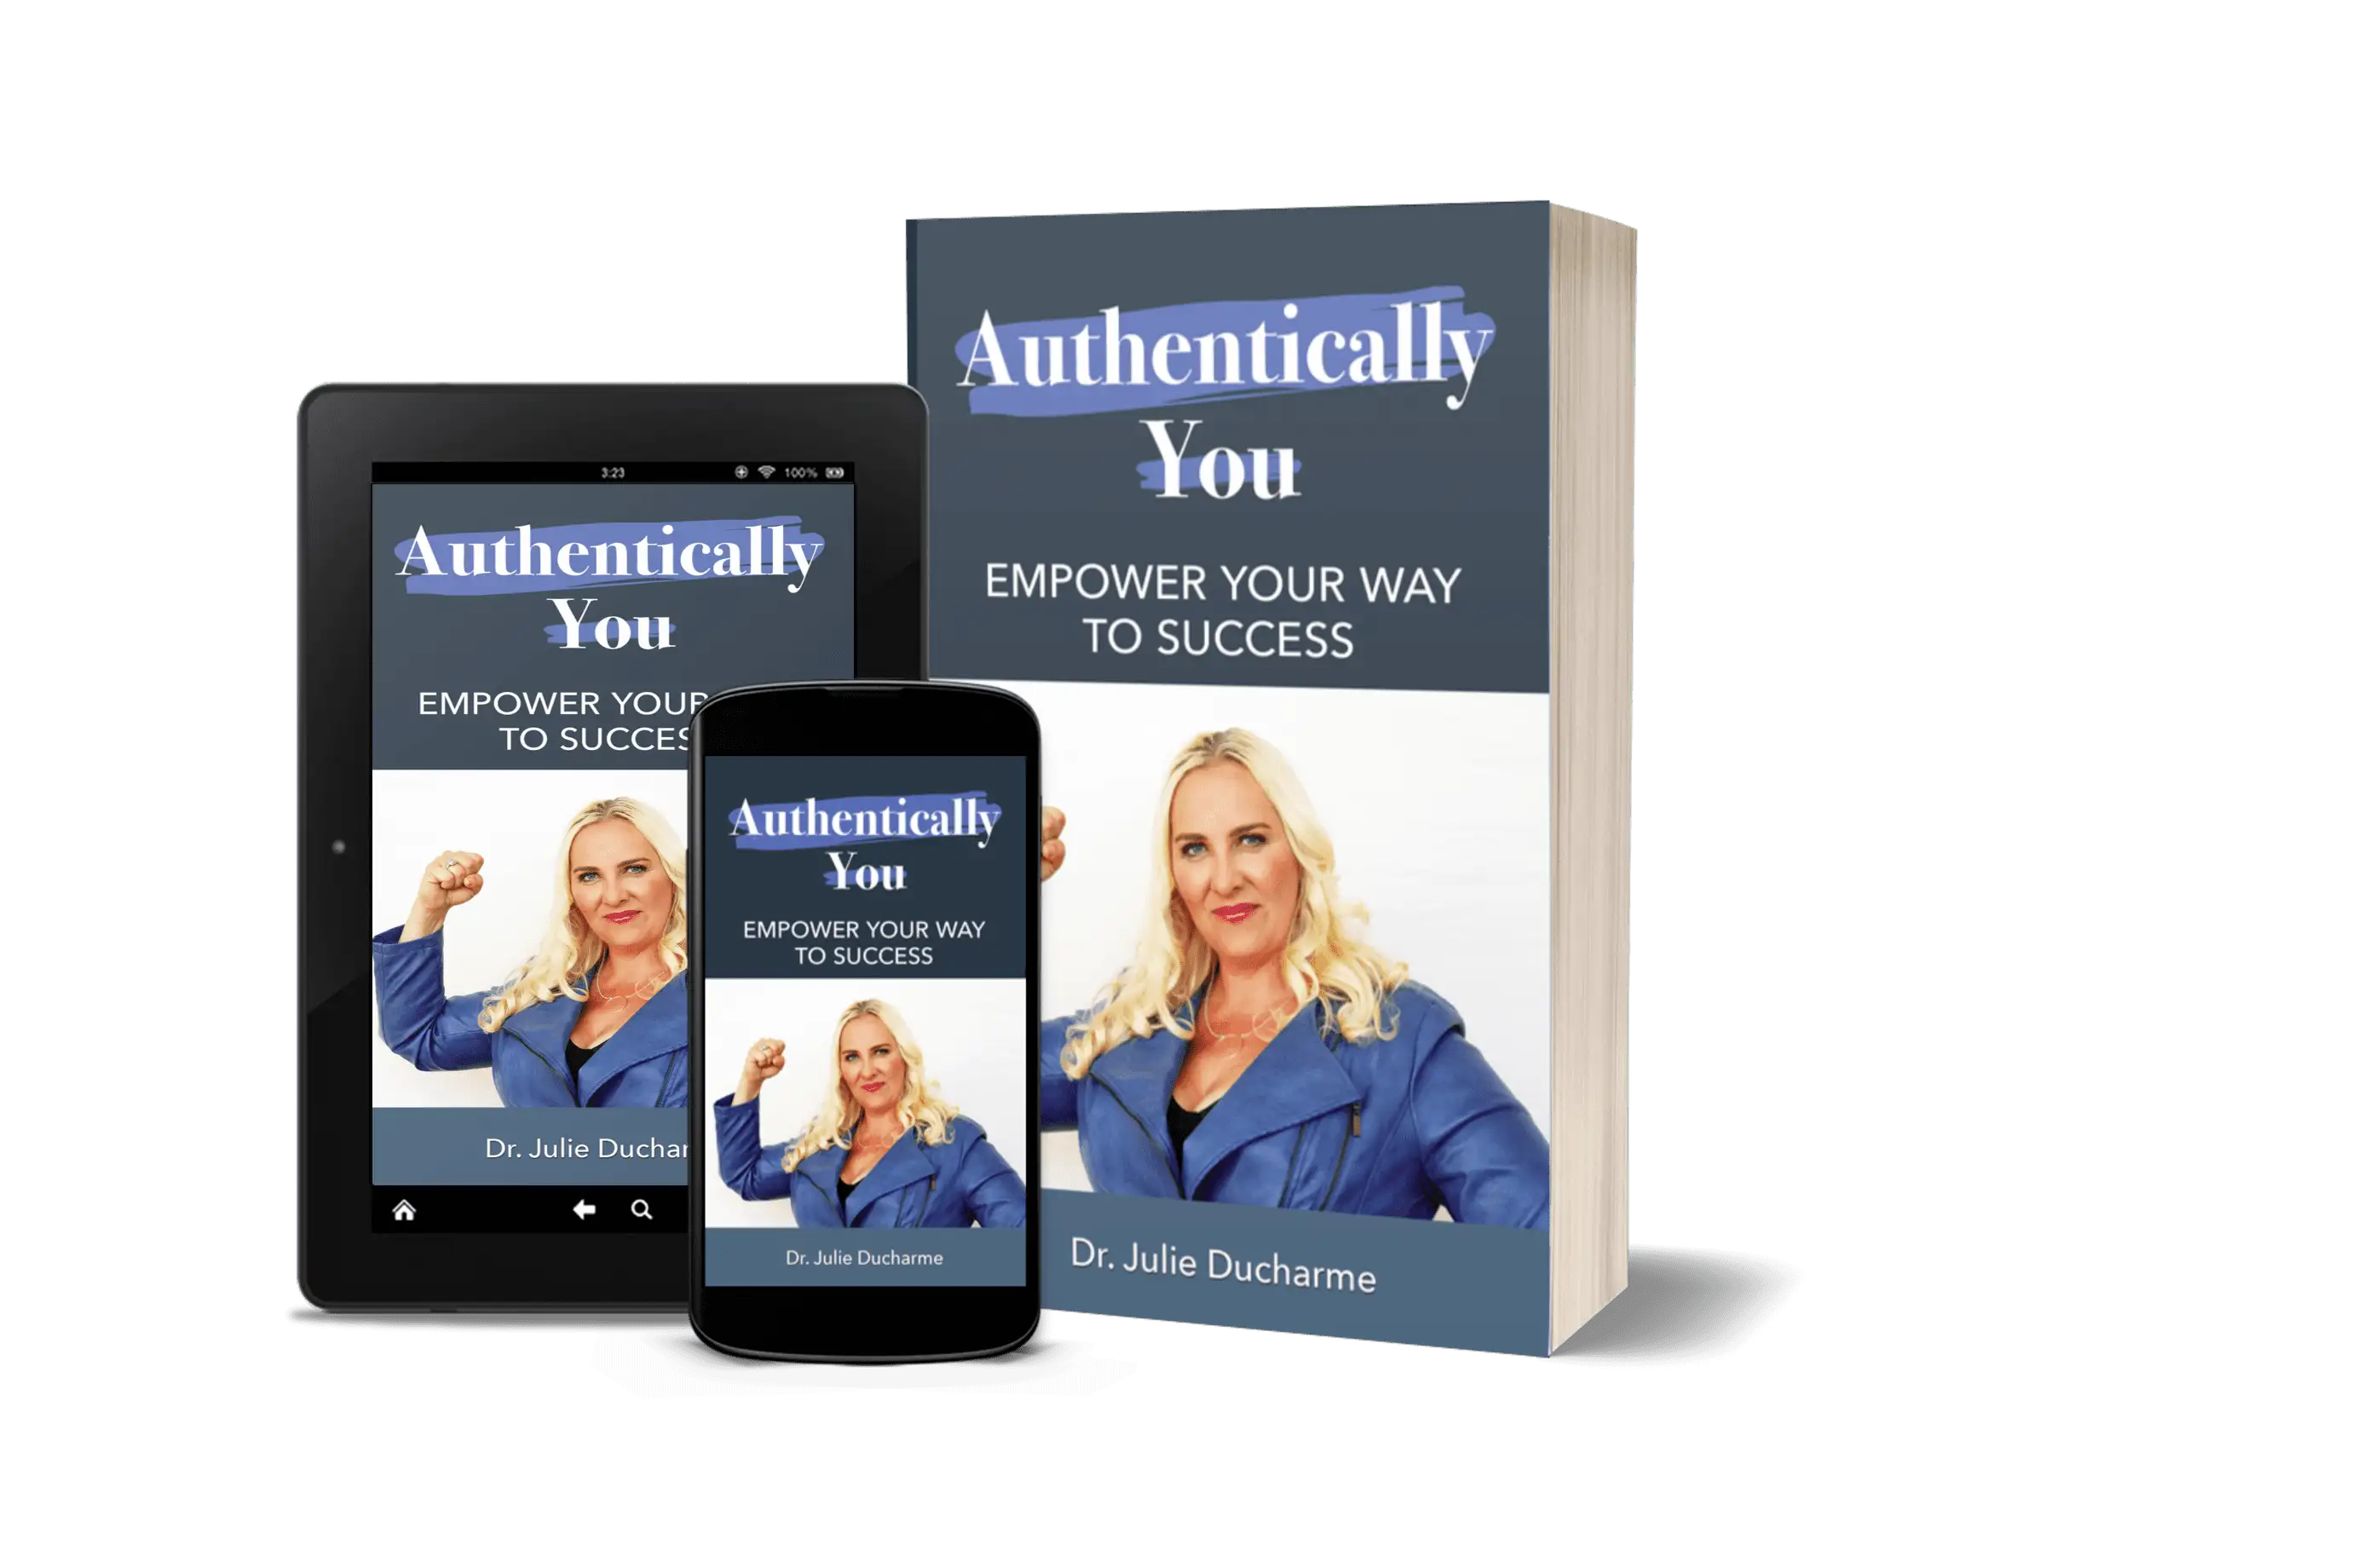 Authentically You: Empower Your Way to Success